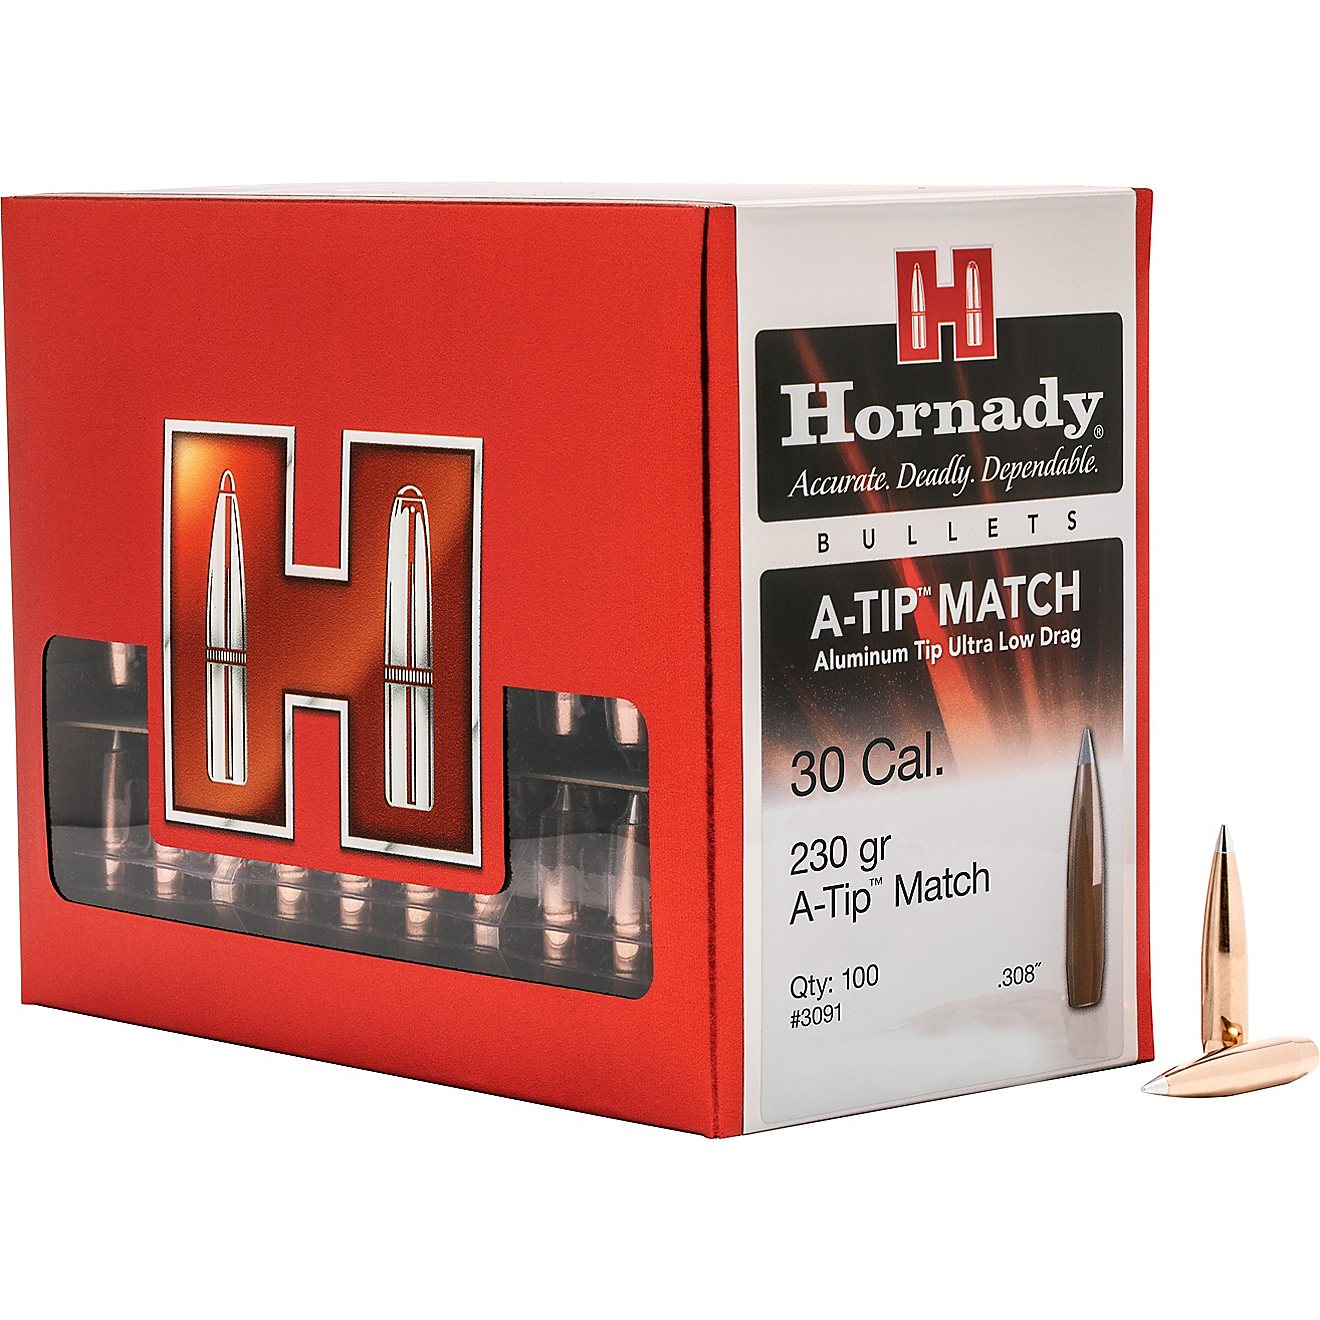 Hornady A-Tip Match 30 Cal .308 230-Grain Reloading Bullets - 100 Rounds                                                         - view number 1